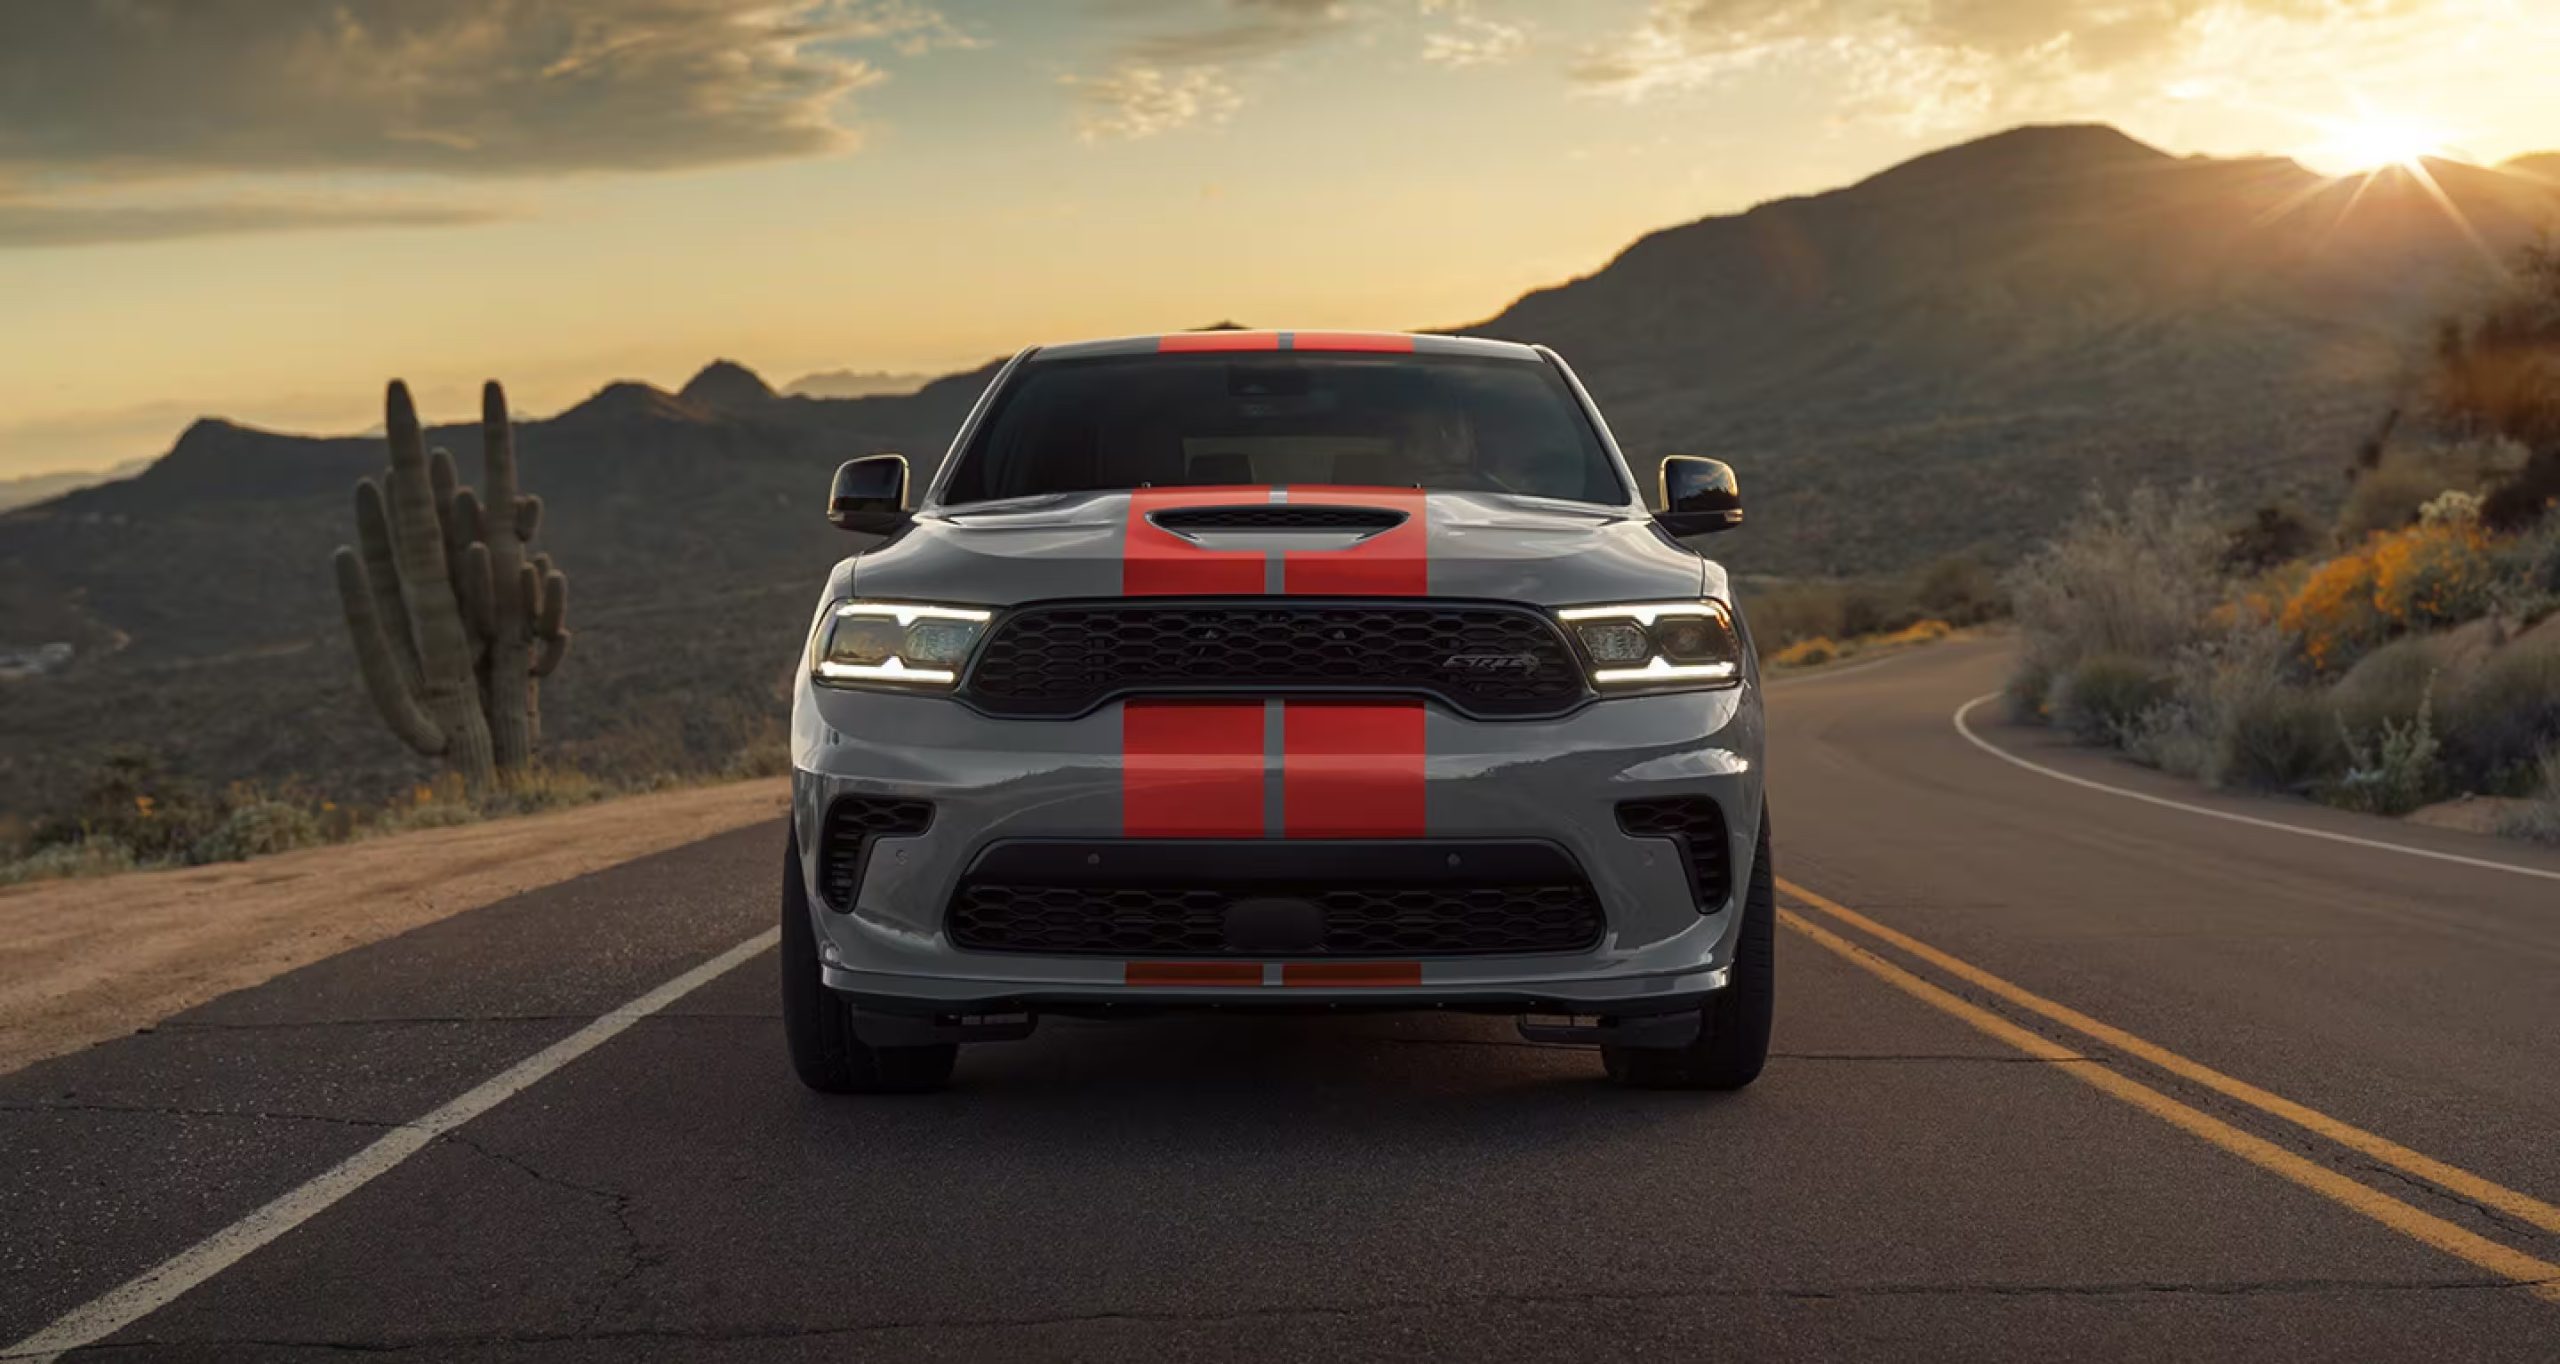 A head on shot of the 2023 Dodge Durango SRT on the open road